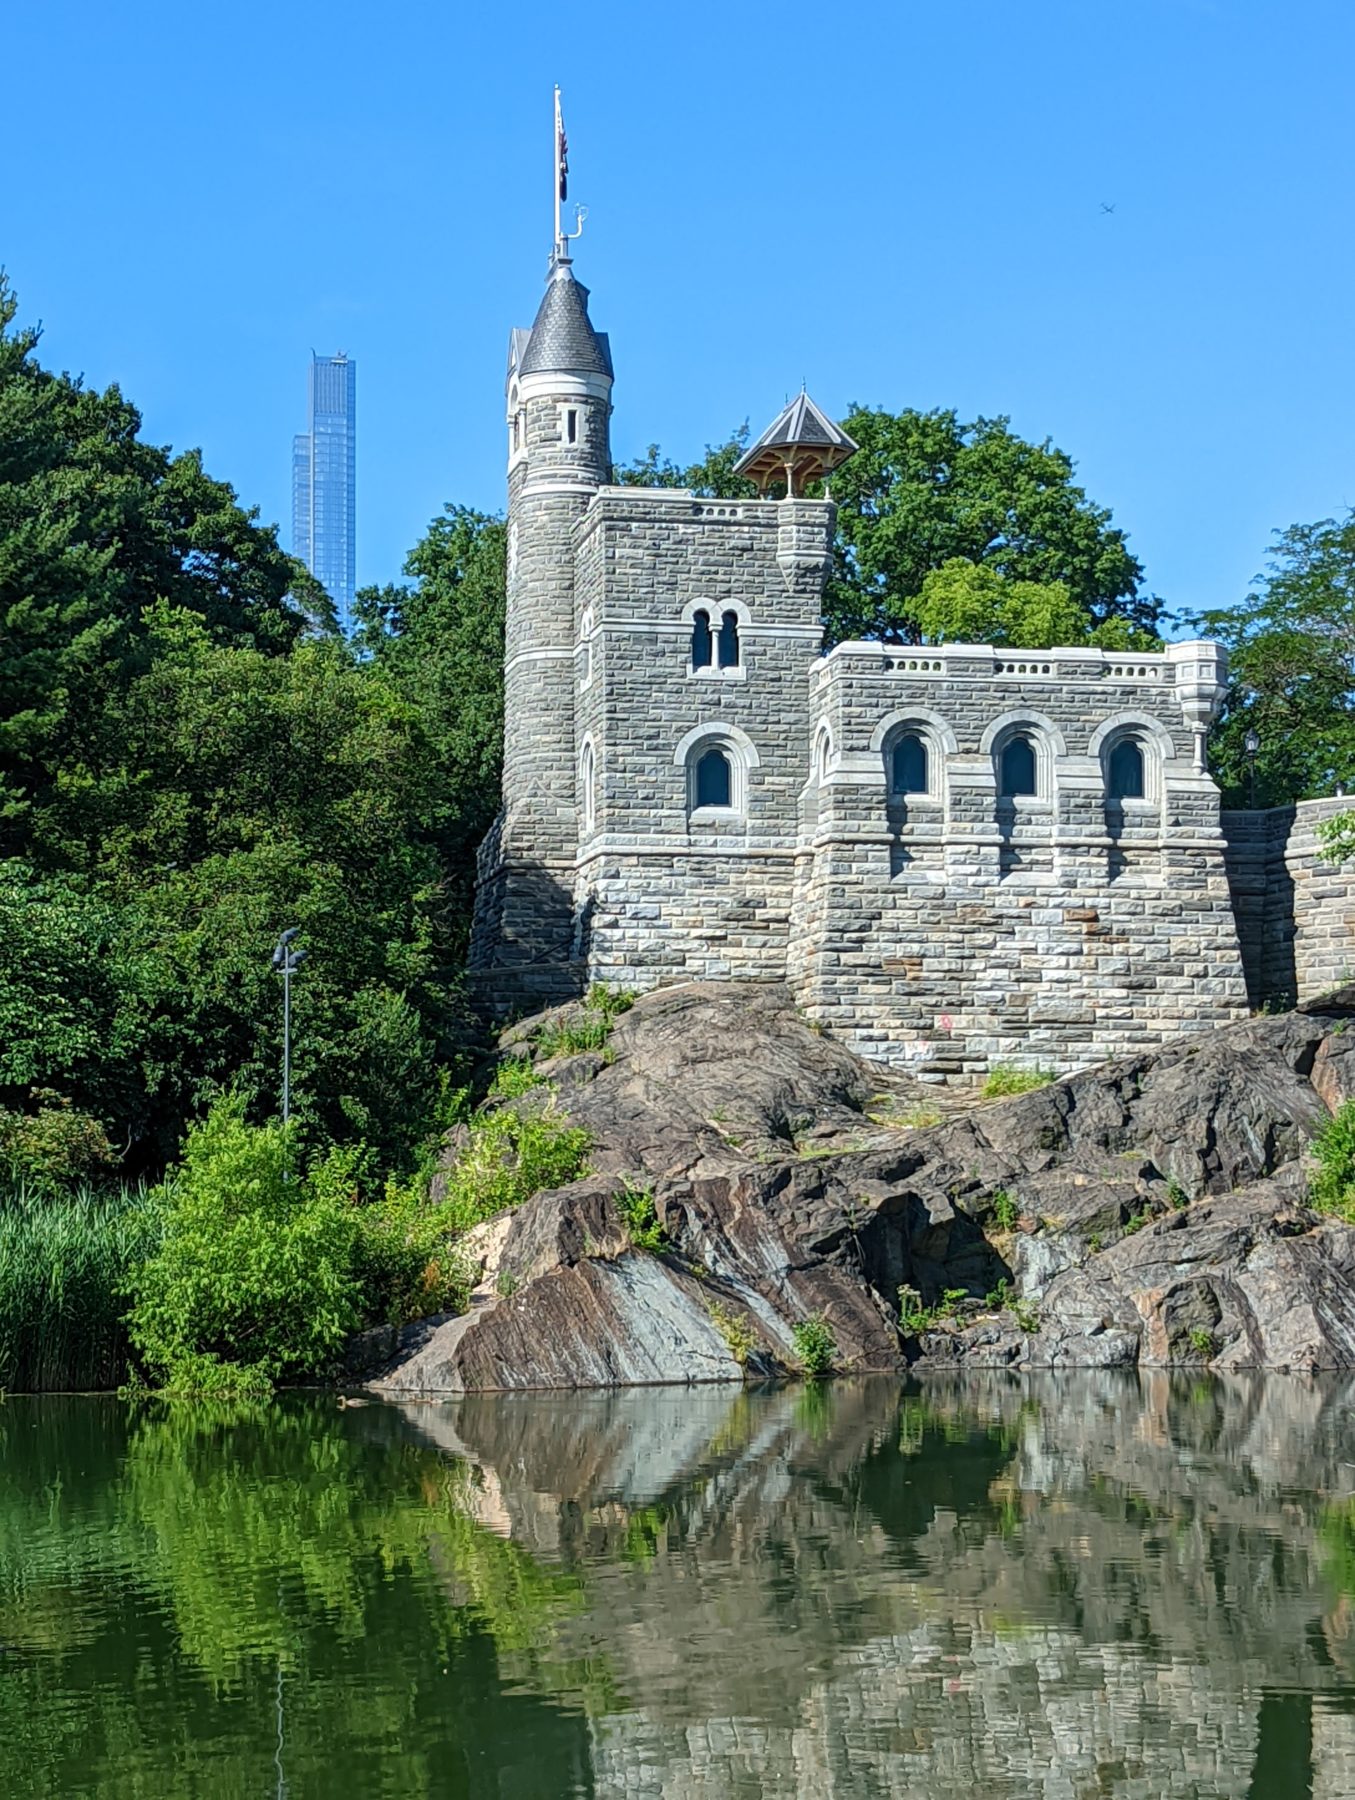 New York Itinerary 2 days - Central Park